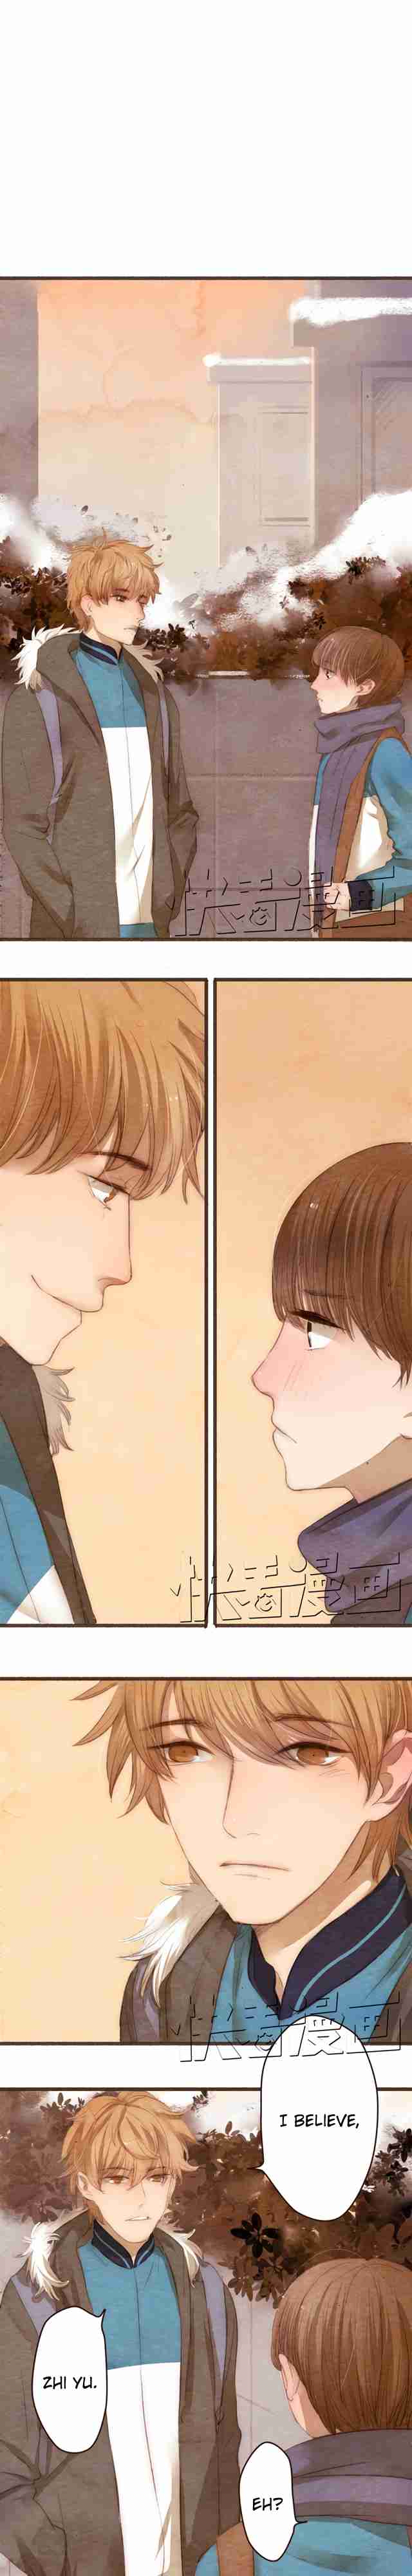 Ten Years Love You Ch. 11 If I Could Turn Back Time, I Never Would Have Let You Go.